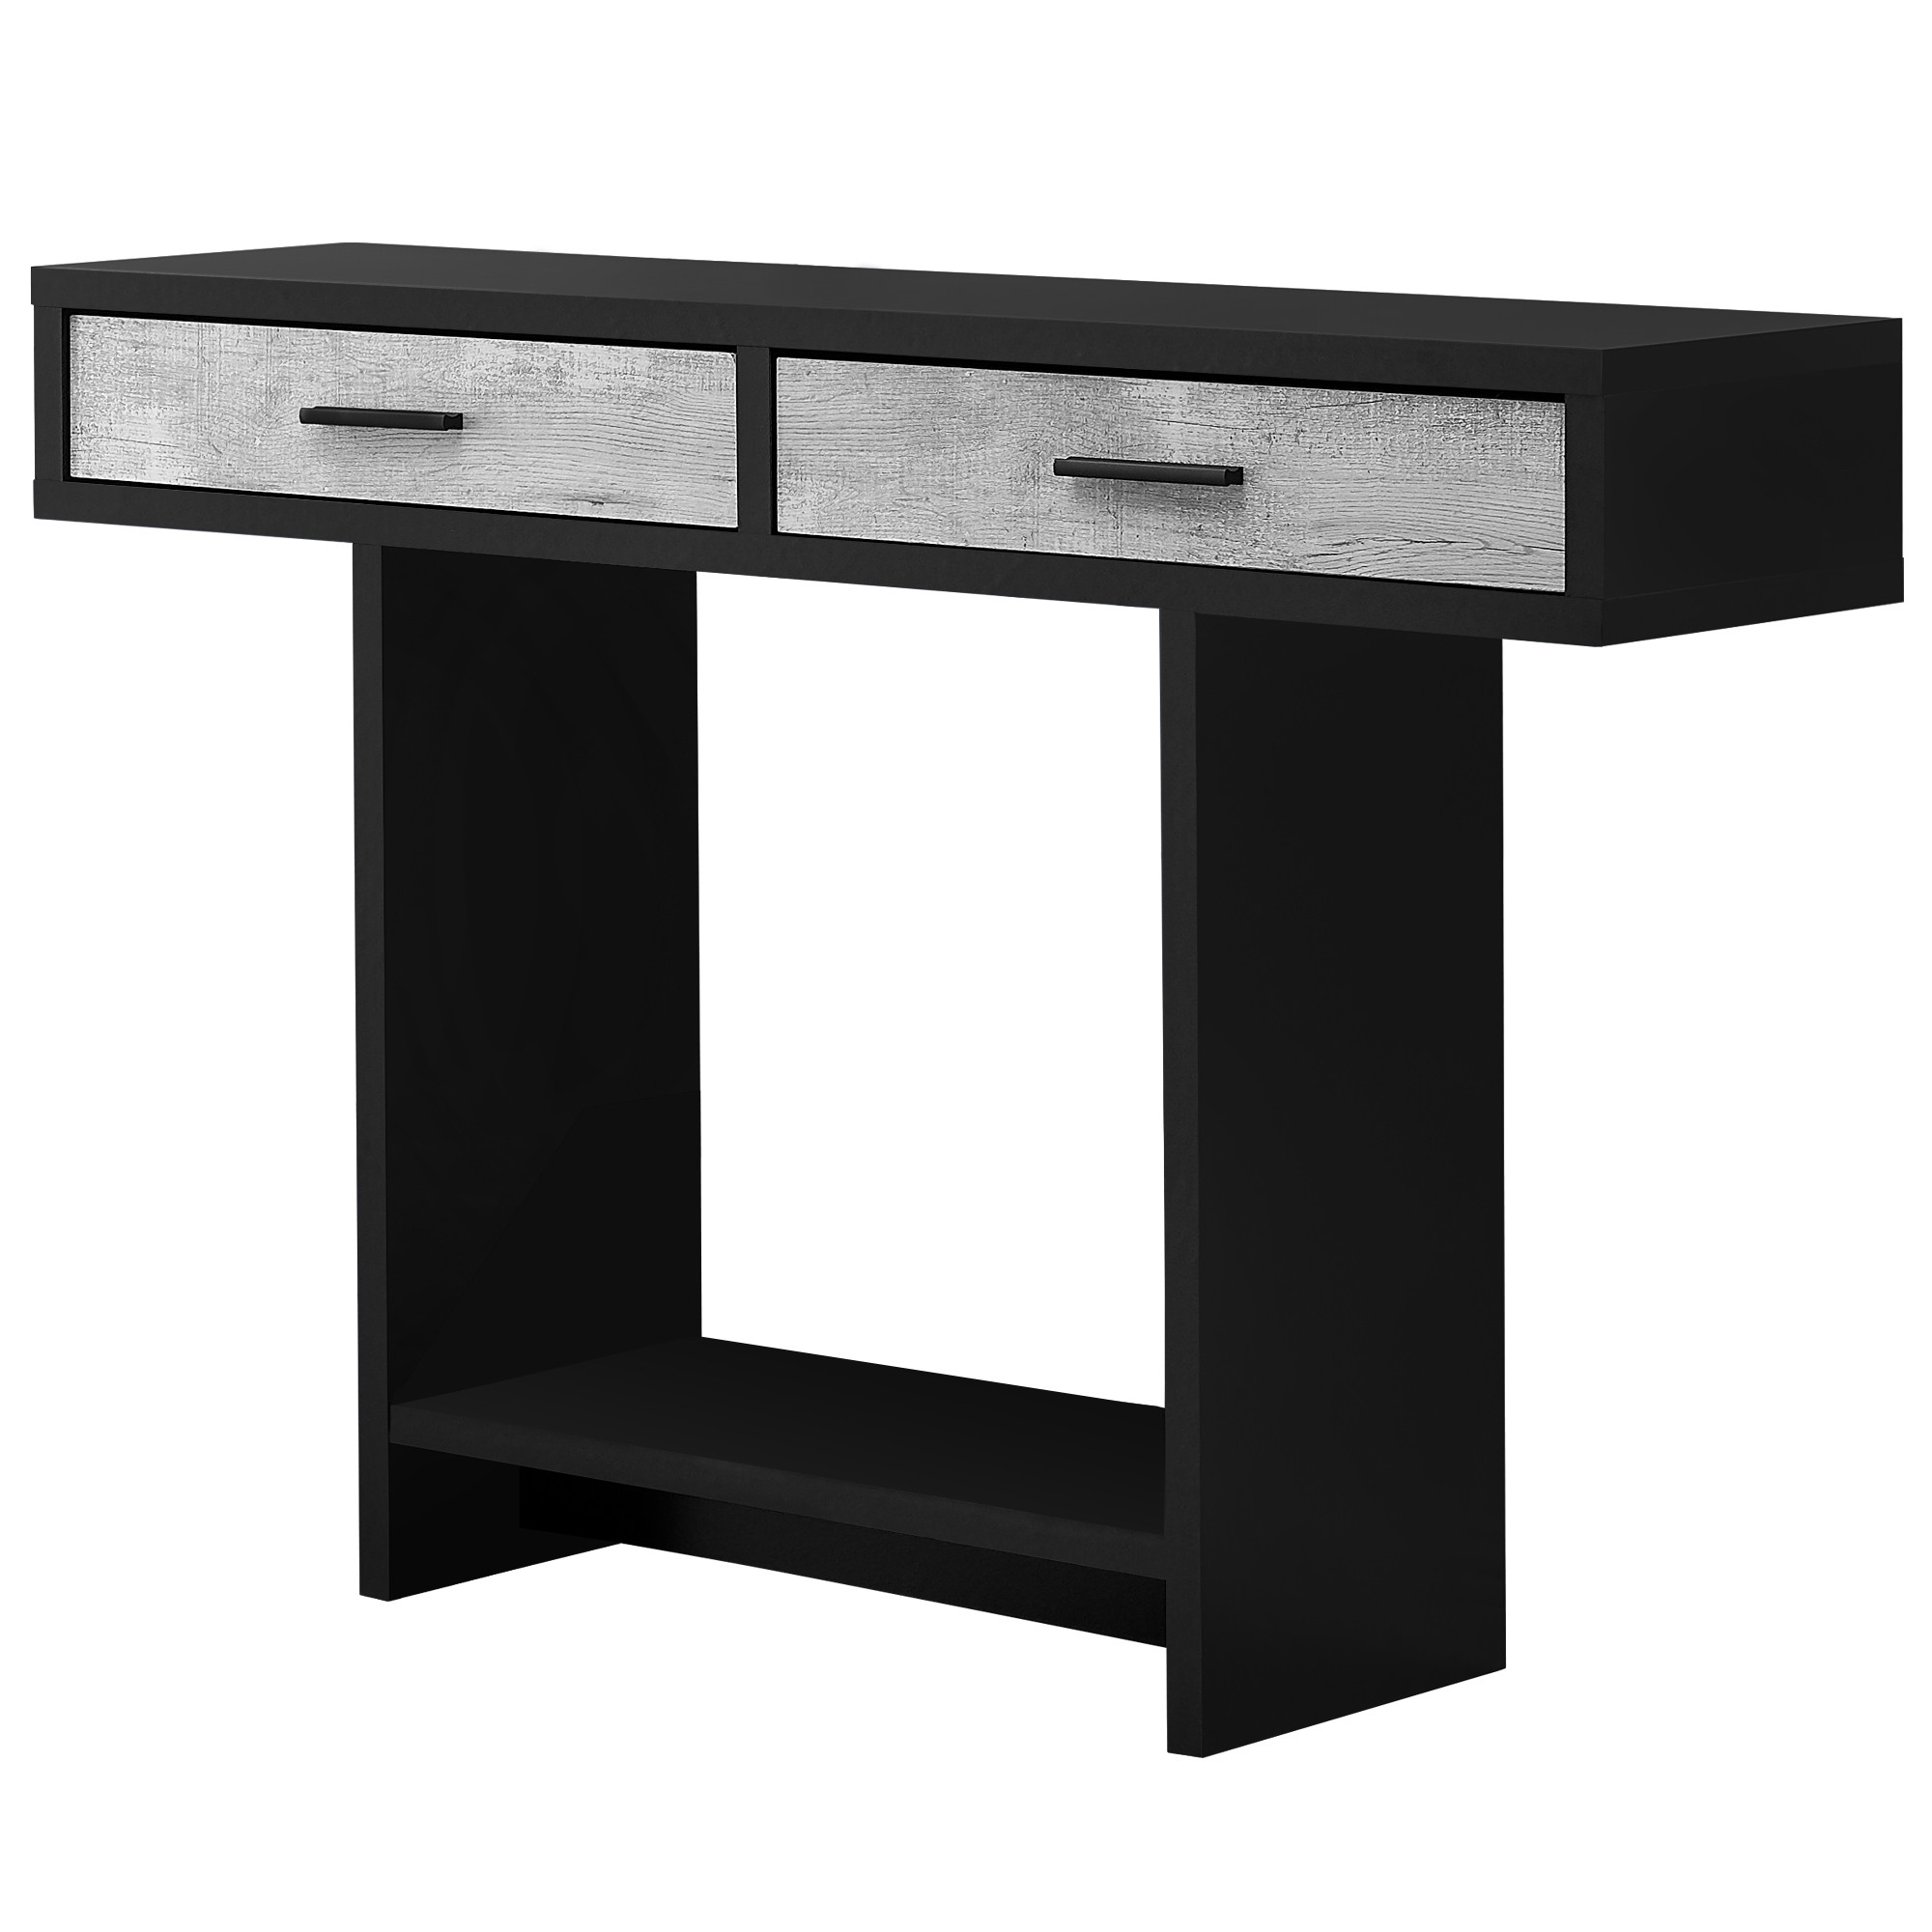 12.25" x 47.25" x 32" Black Grey Particle Board Hollow Core Accent Table with 2 Drawers